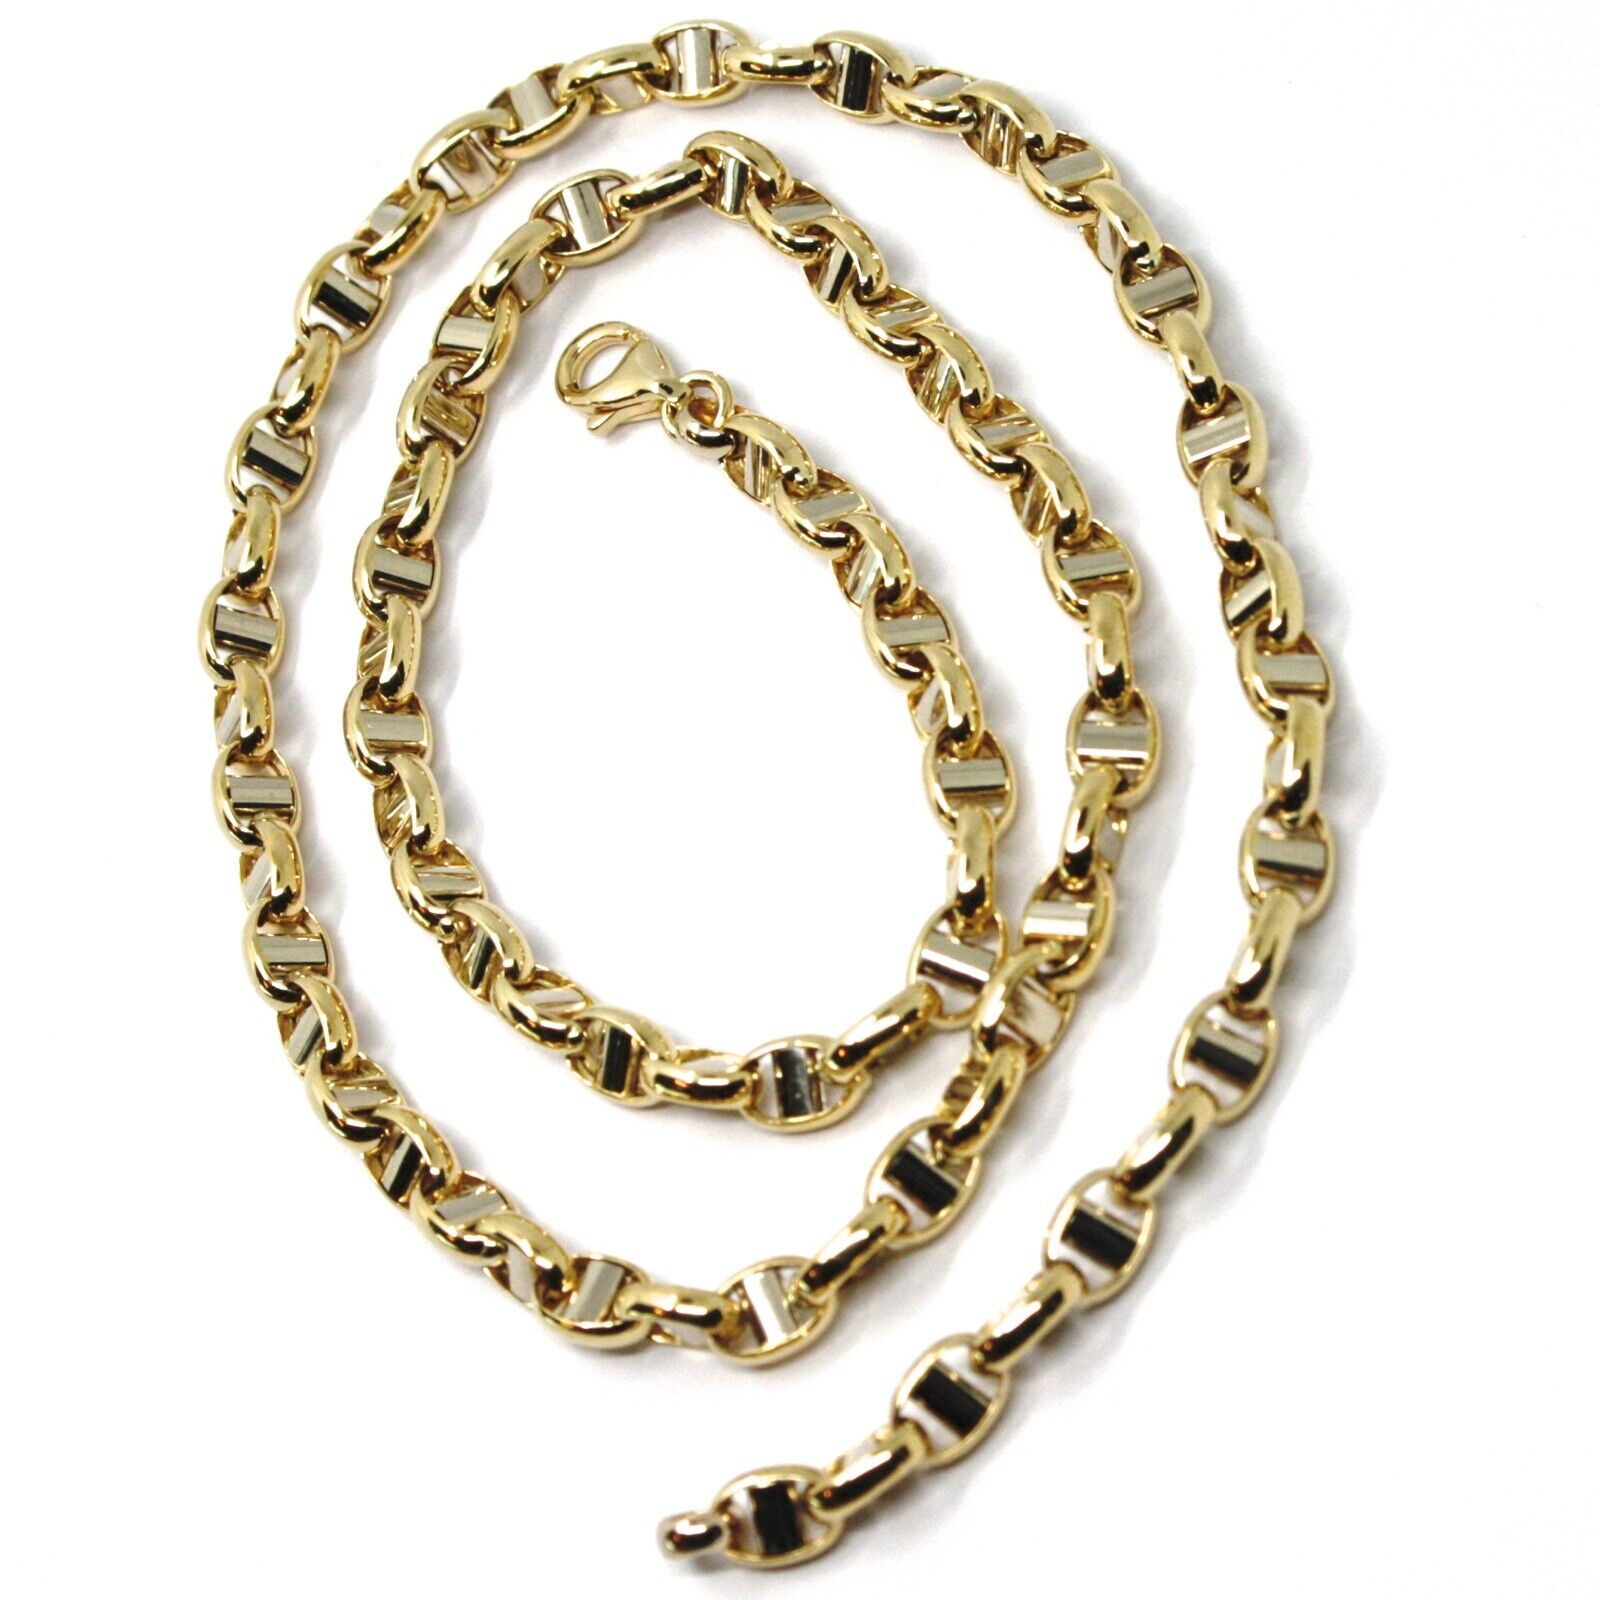 18K YELLOW WHITE GOLD CHAIN SAILOR'S NAVY MARINER LINK BIG OVAL 5 MM, 20  INCHES